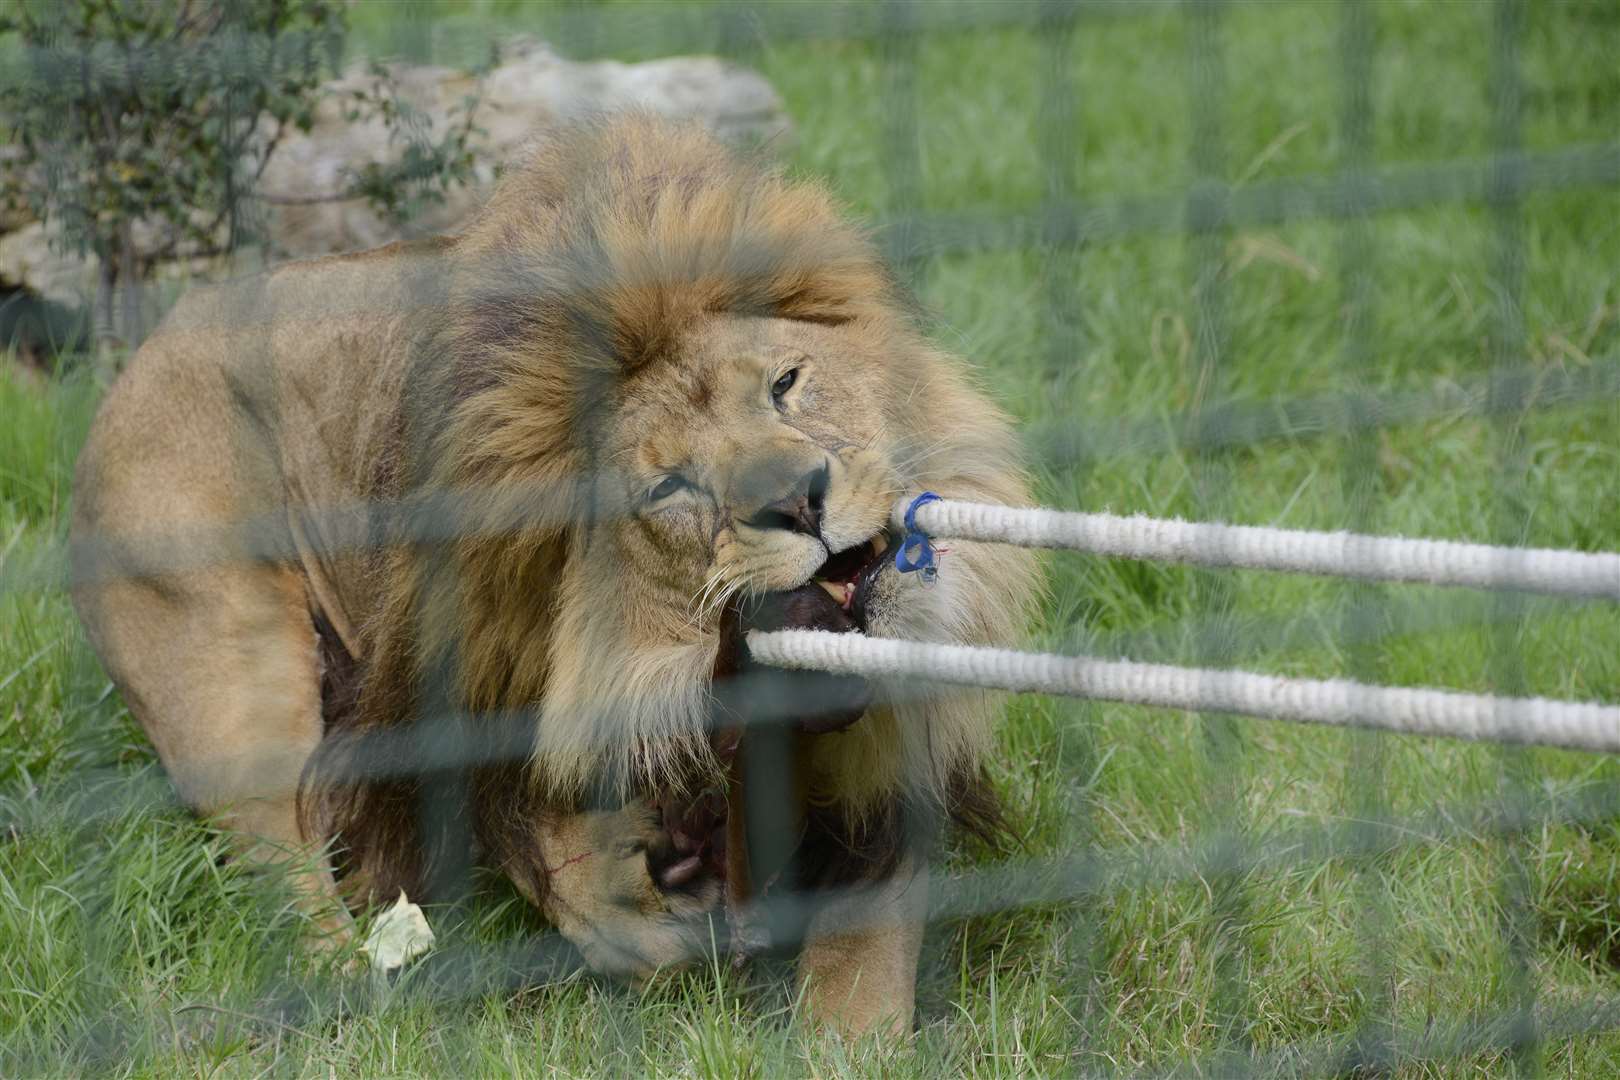 African lion Kasanga holds on to his dinner in the tug of war